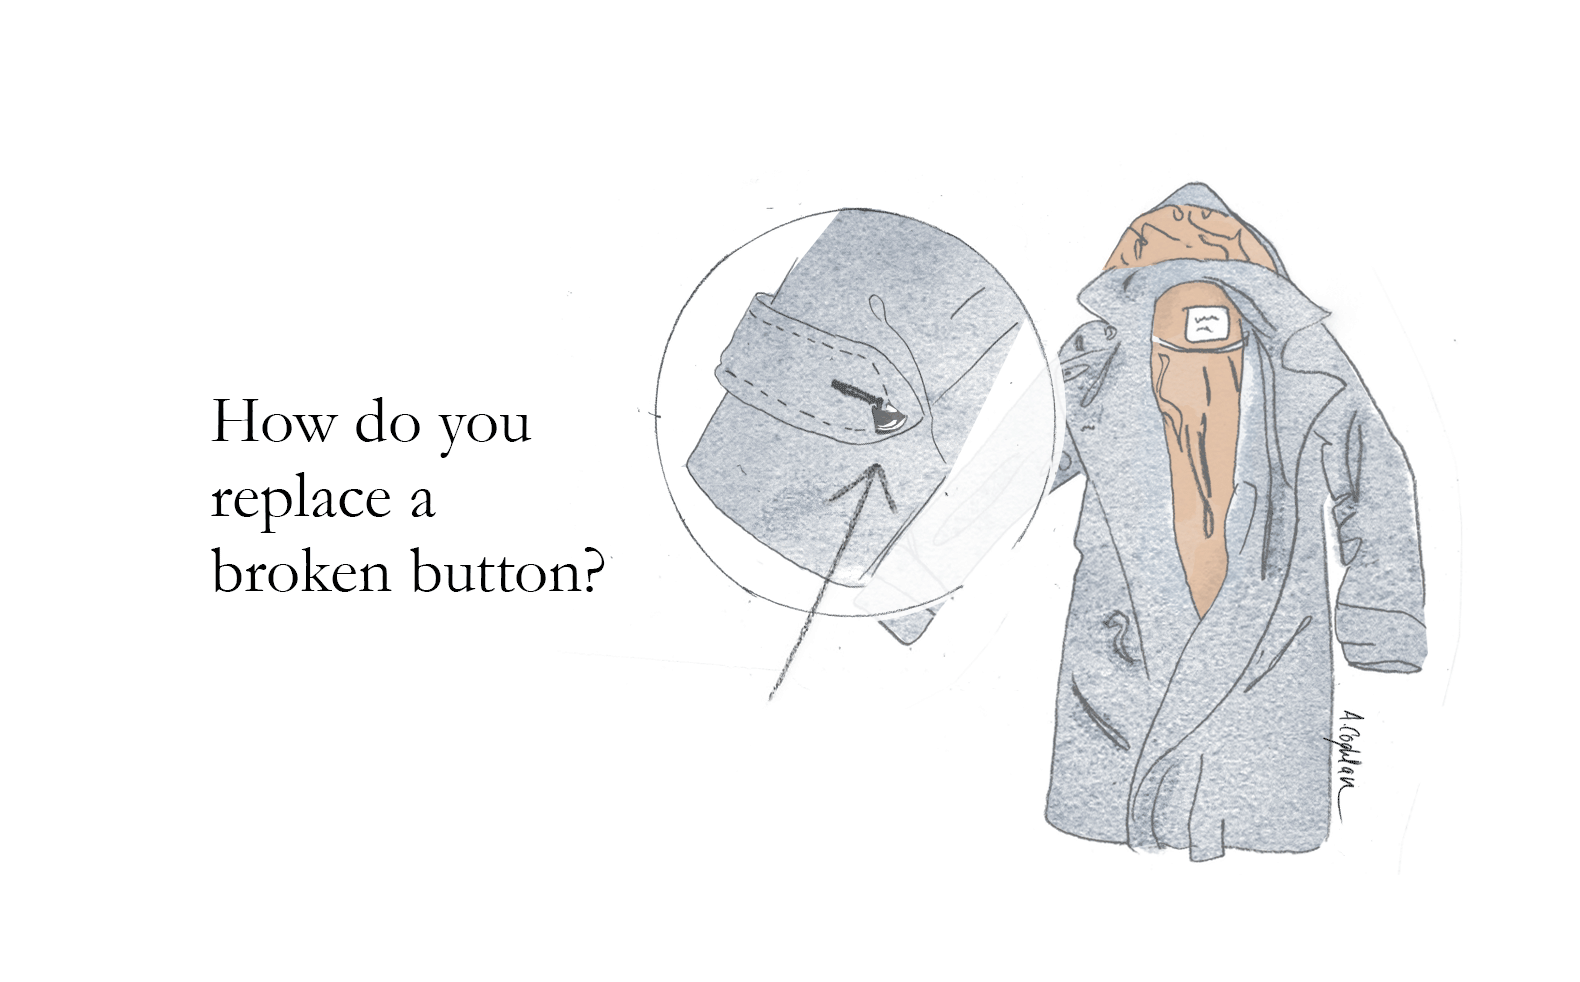 An illustration of a raincoat with the accompanying question “How do you replace a broken button?”